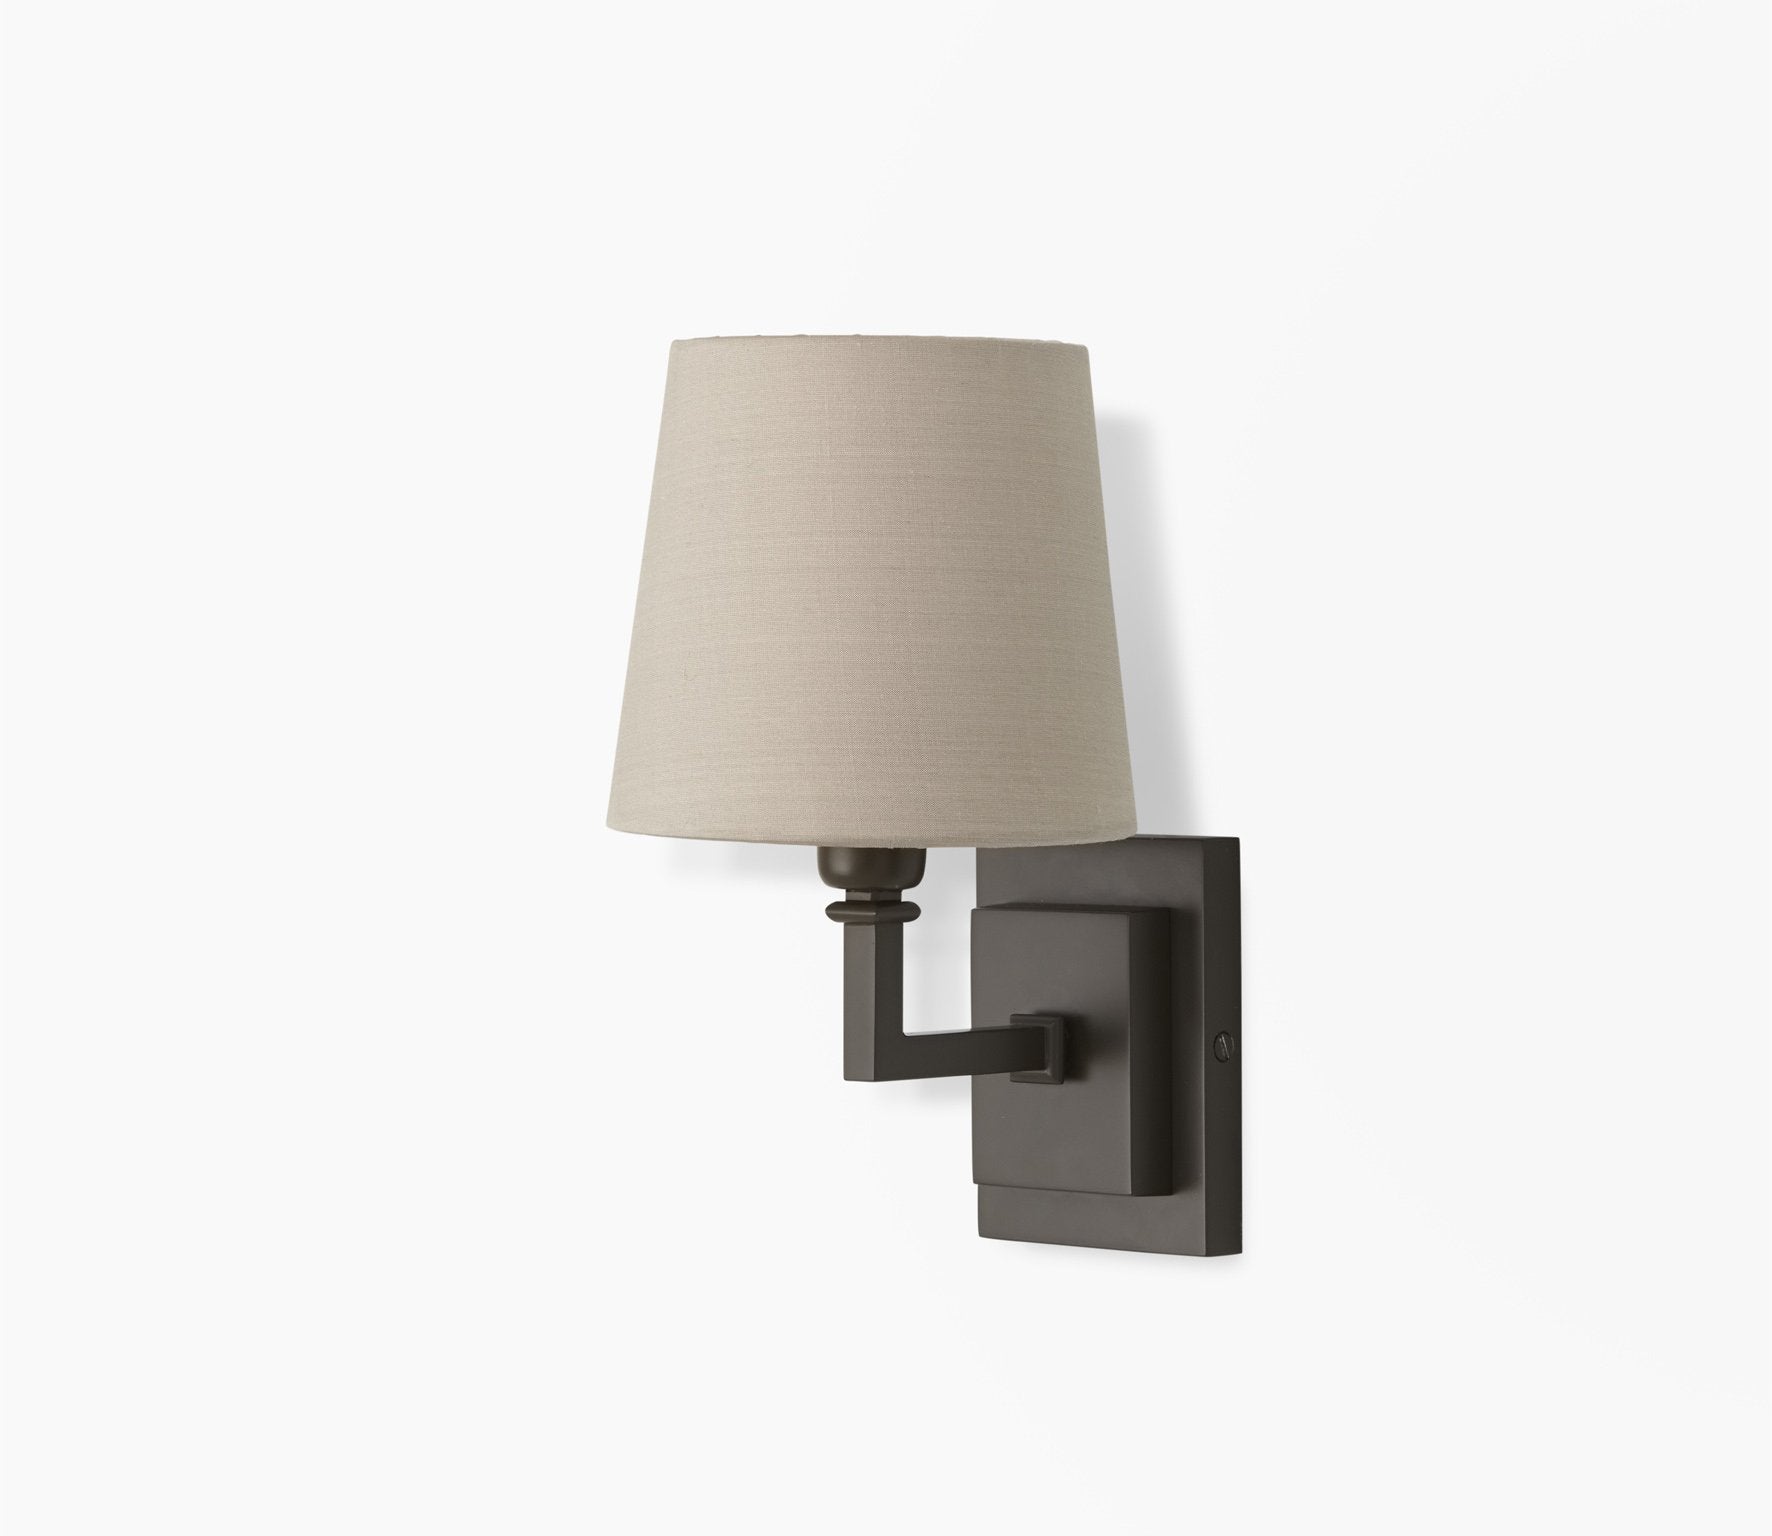 Parker Wall Light with Drum Shade Product Image 1